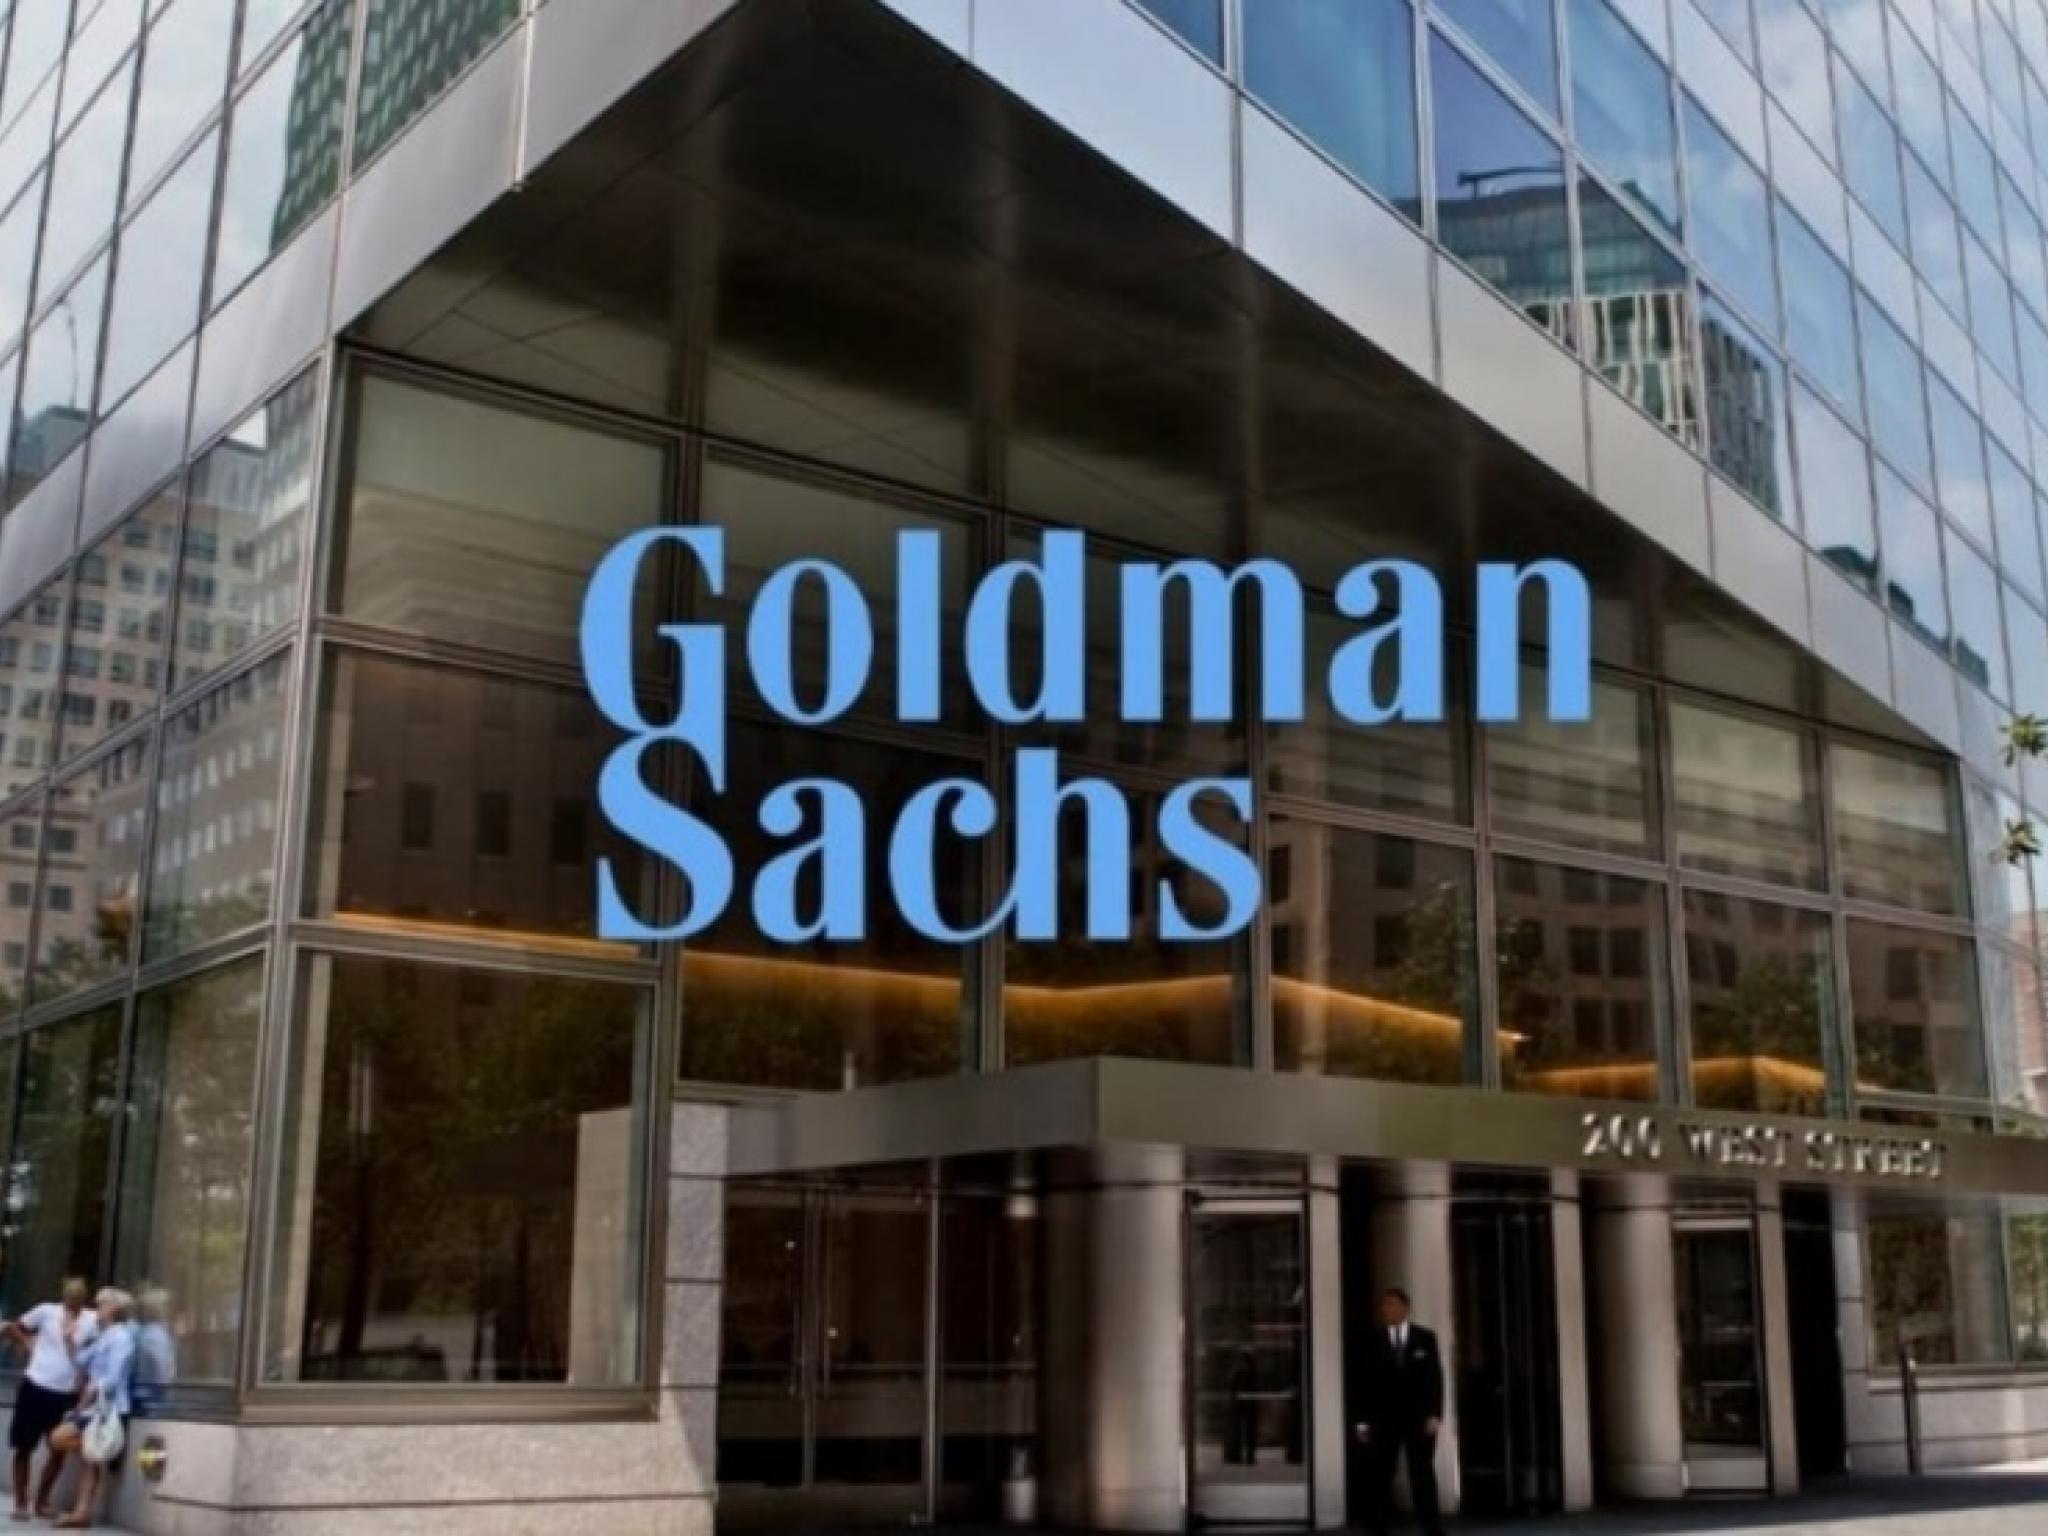  goldman-sachs-boasts-near-perfect-q1-results-5-analysts-zero-in-on-core-strengths 